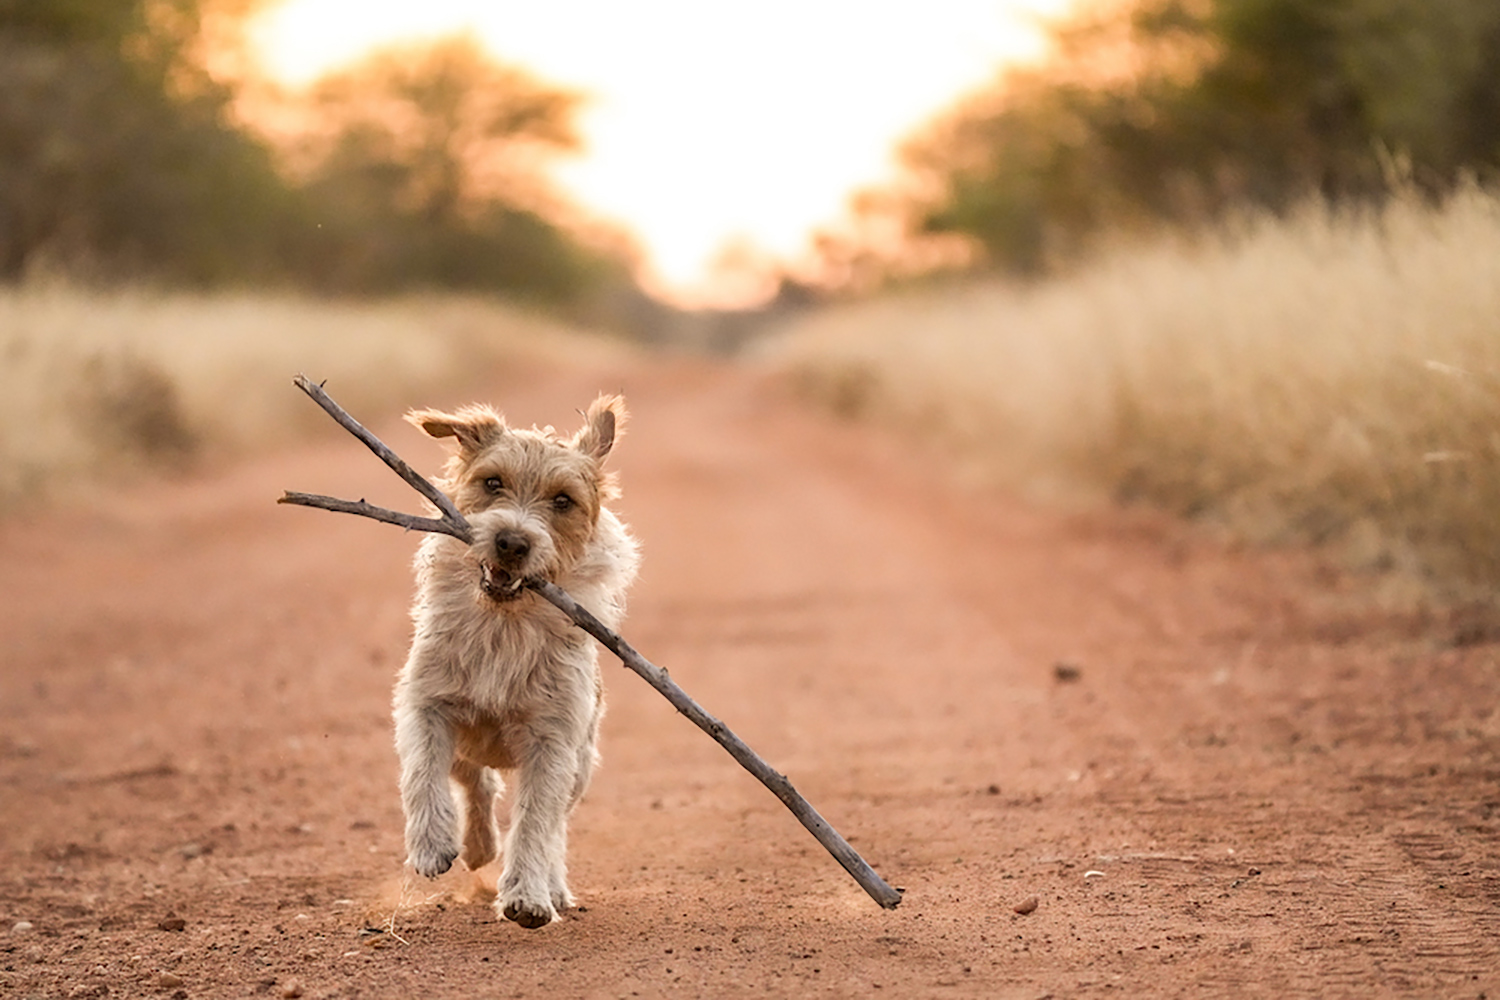 jack russell terrier, ears flopping with the activity, carries a big stick down a dirt road